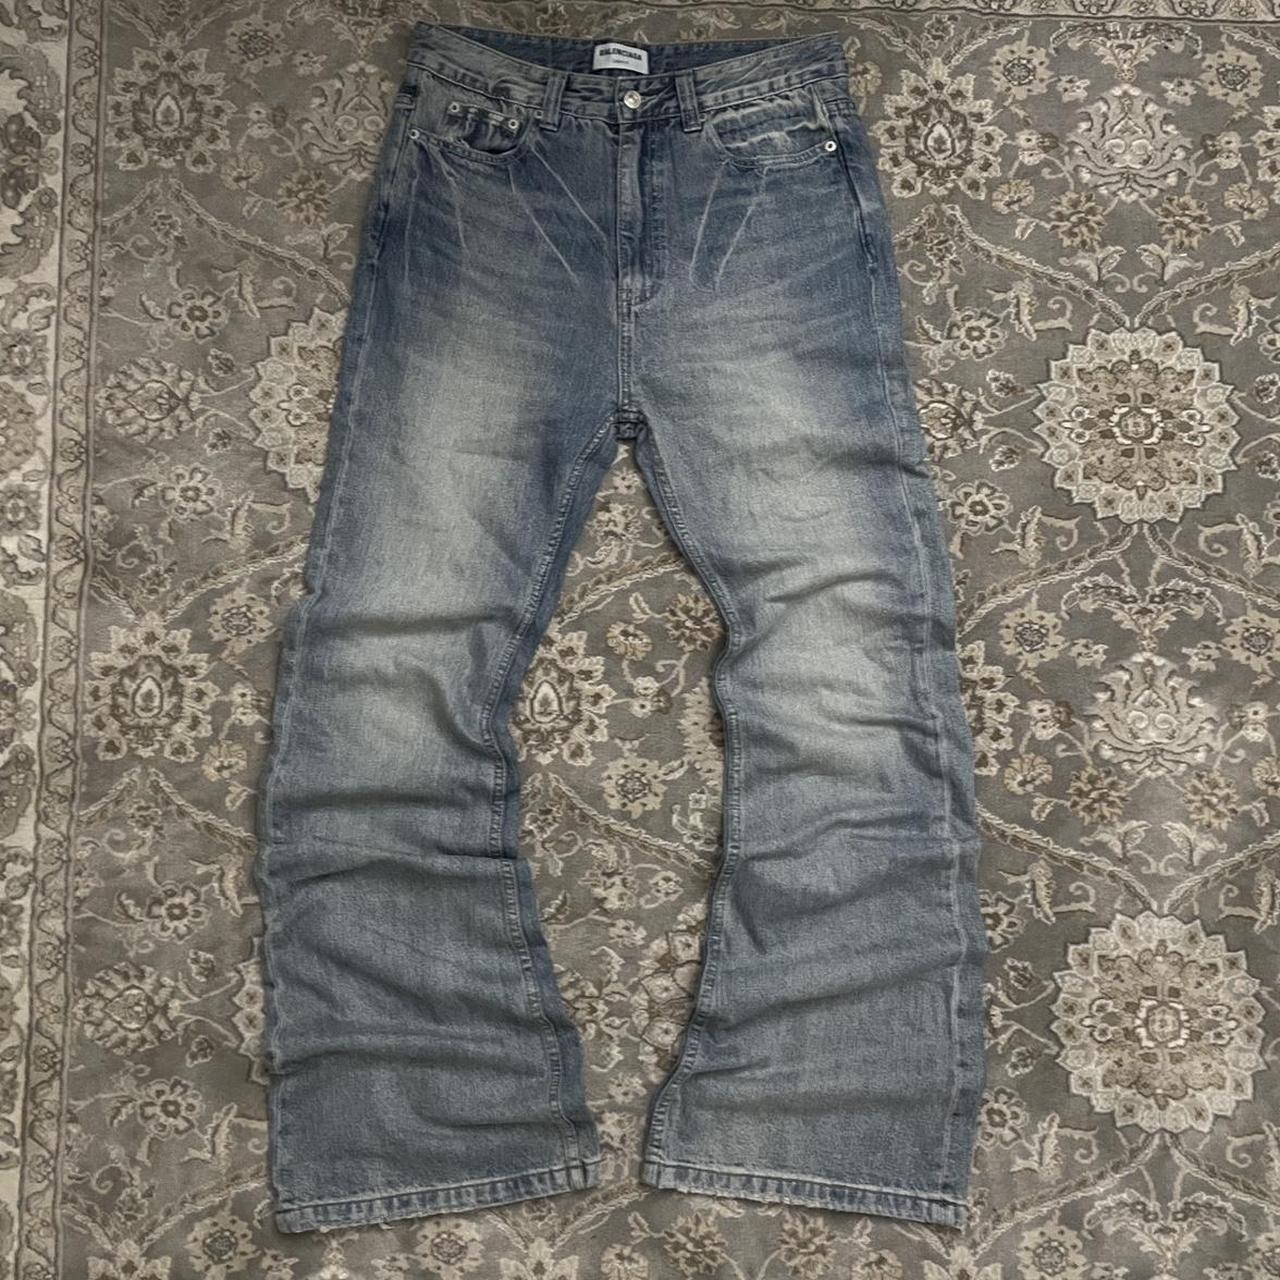 Balenciaga unfit baggy jeans lost tapes flared... - Depop